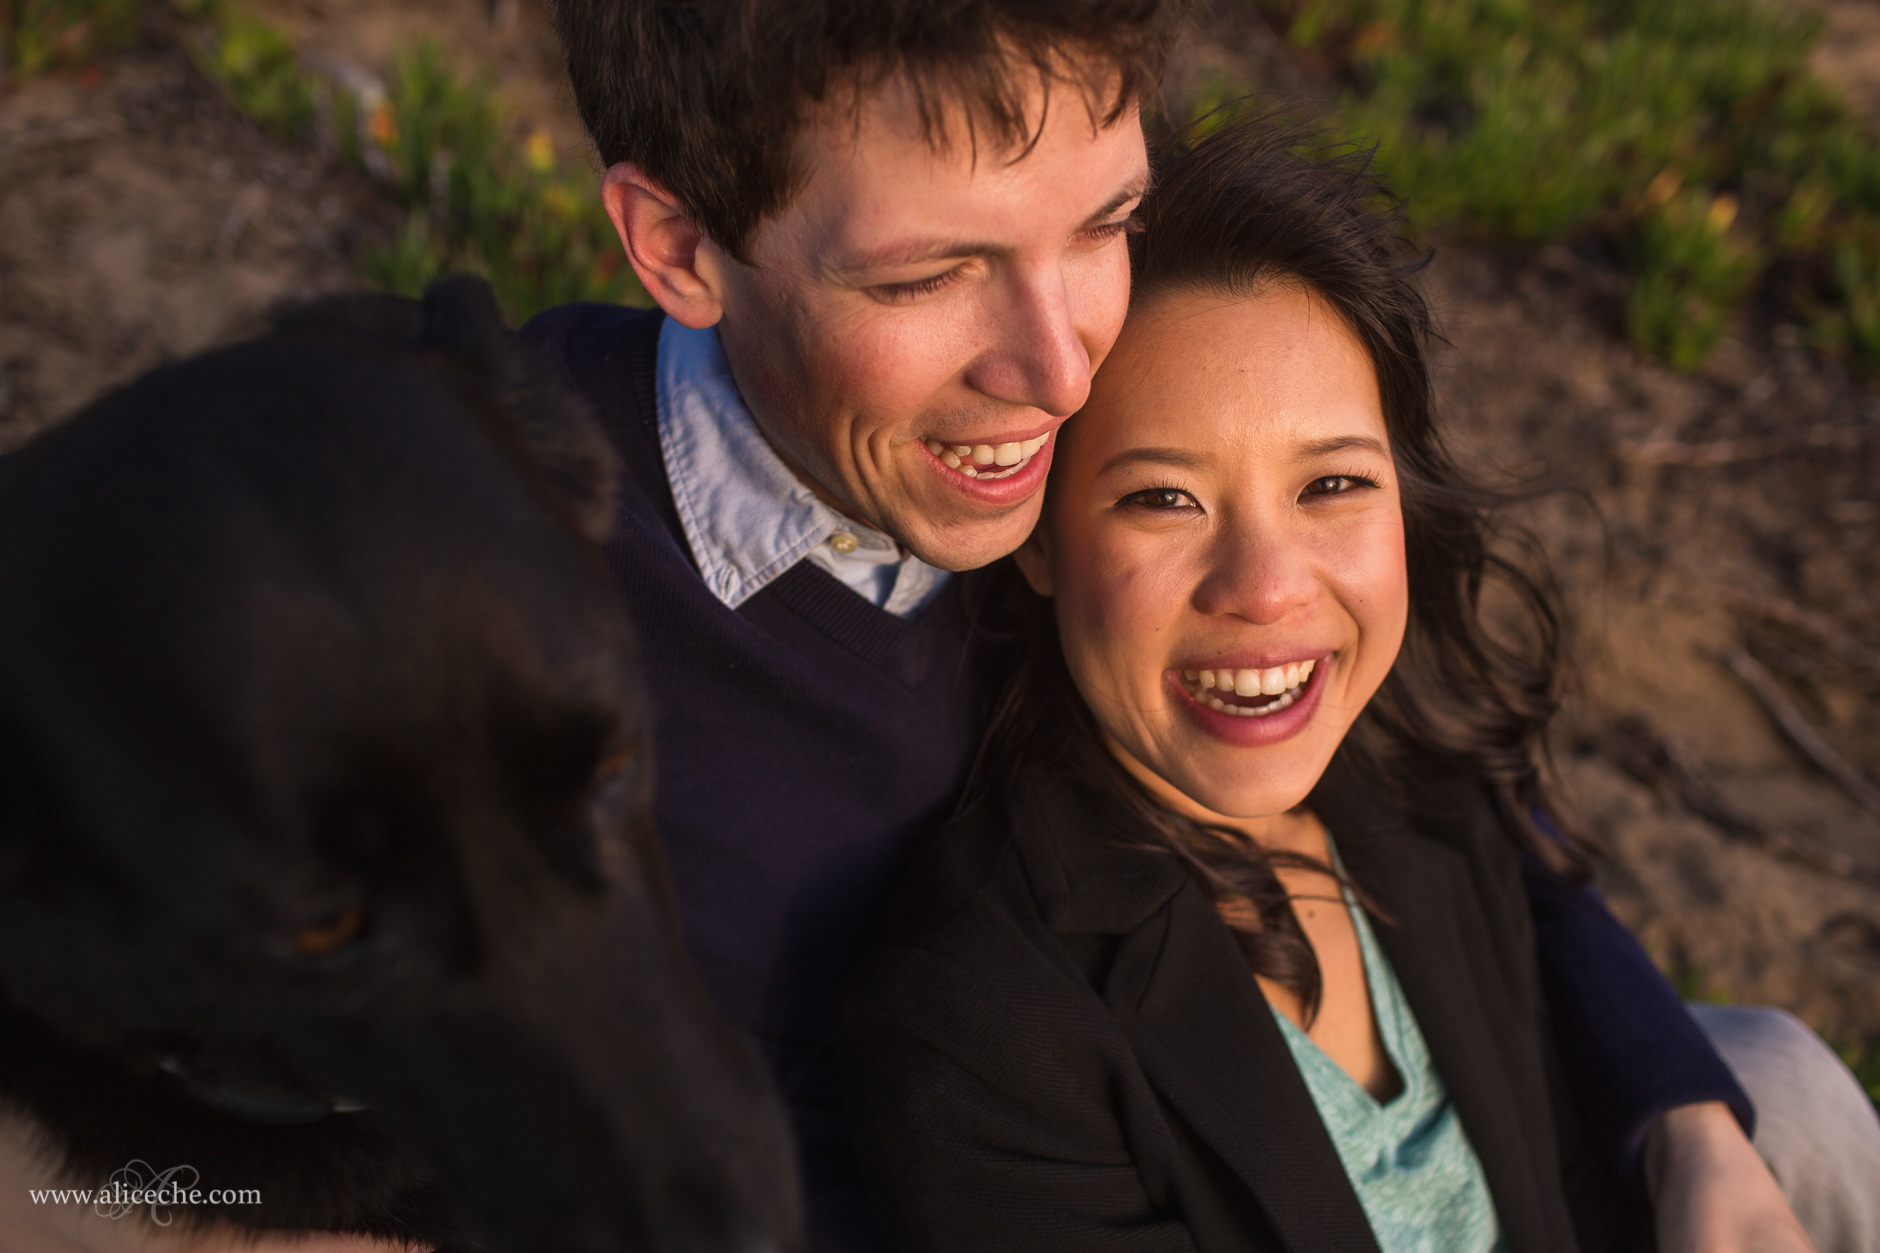 alice-che-photography-laughing-couple-with-dog-san-francisco-engagement